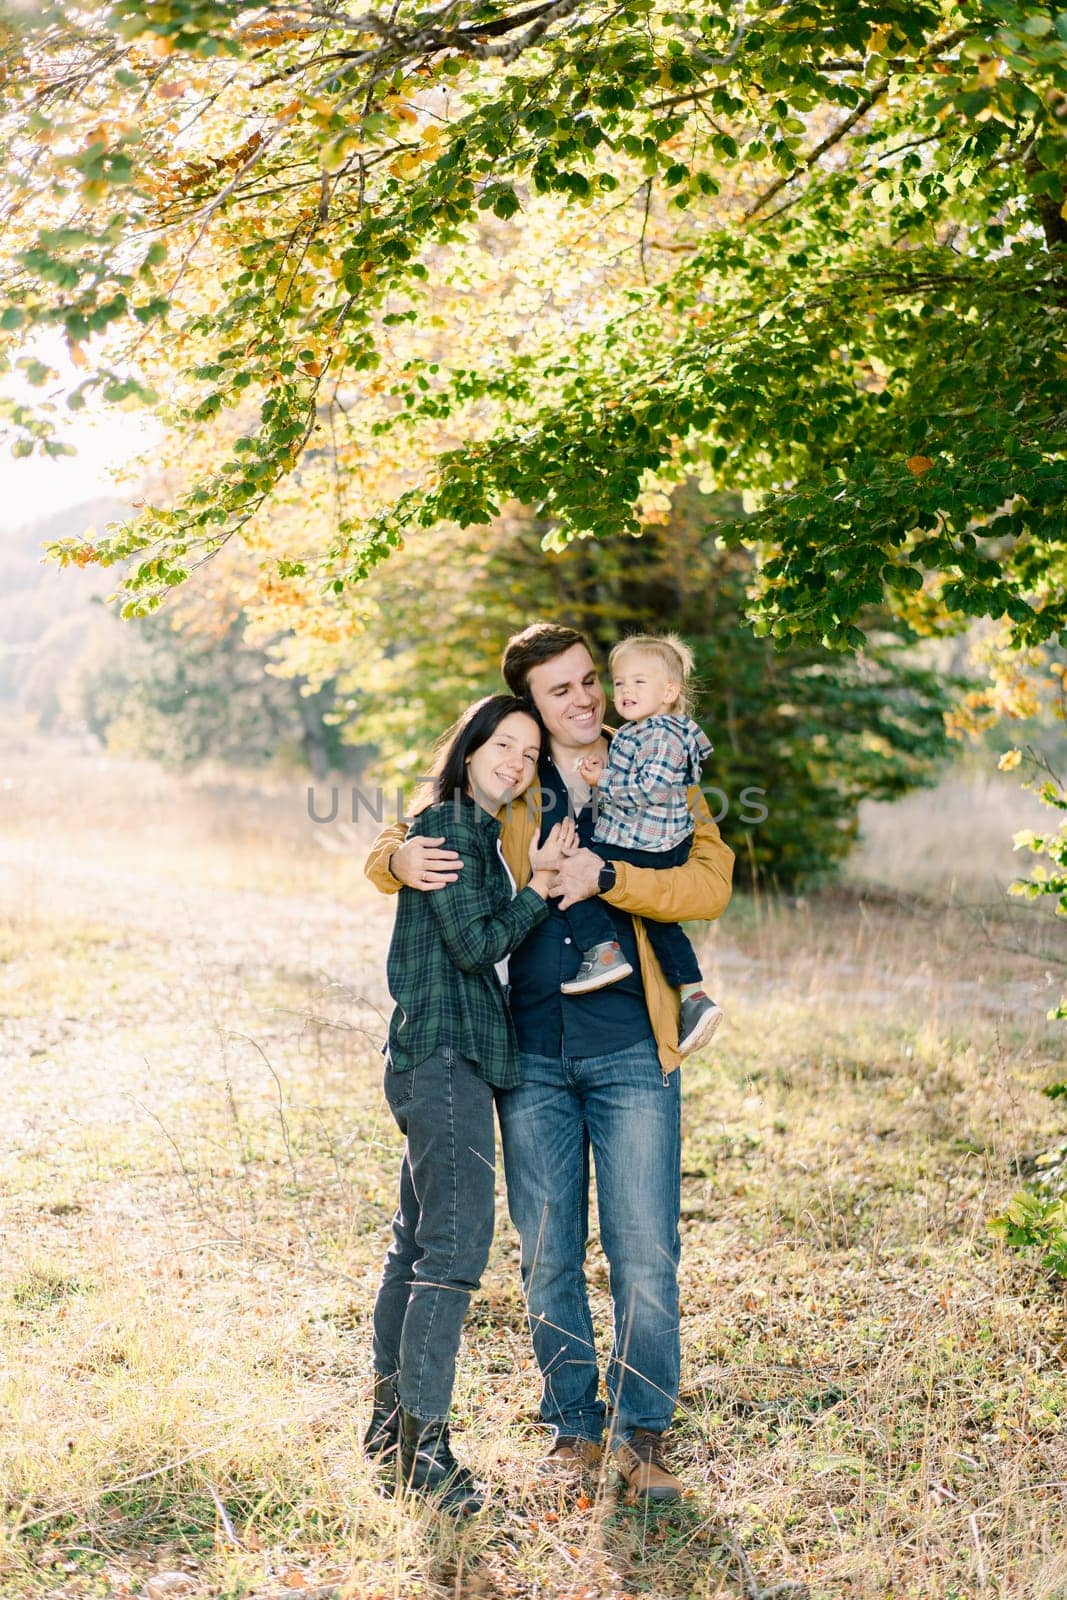 Mom hugs dad with a little girl in his arms while standing in the autumn forest by Nadtochiy